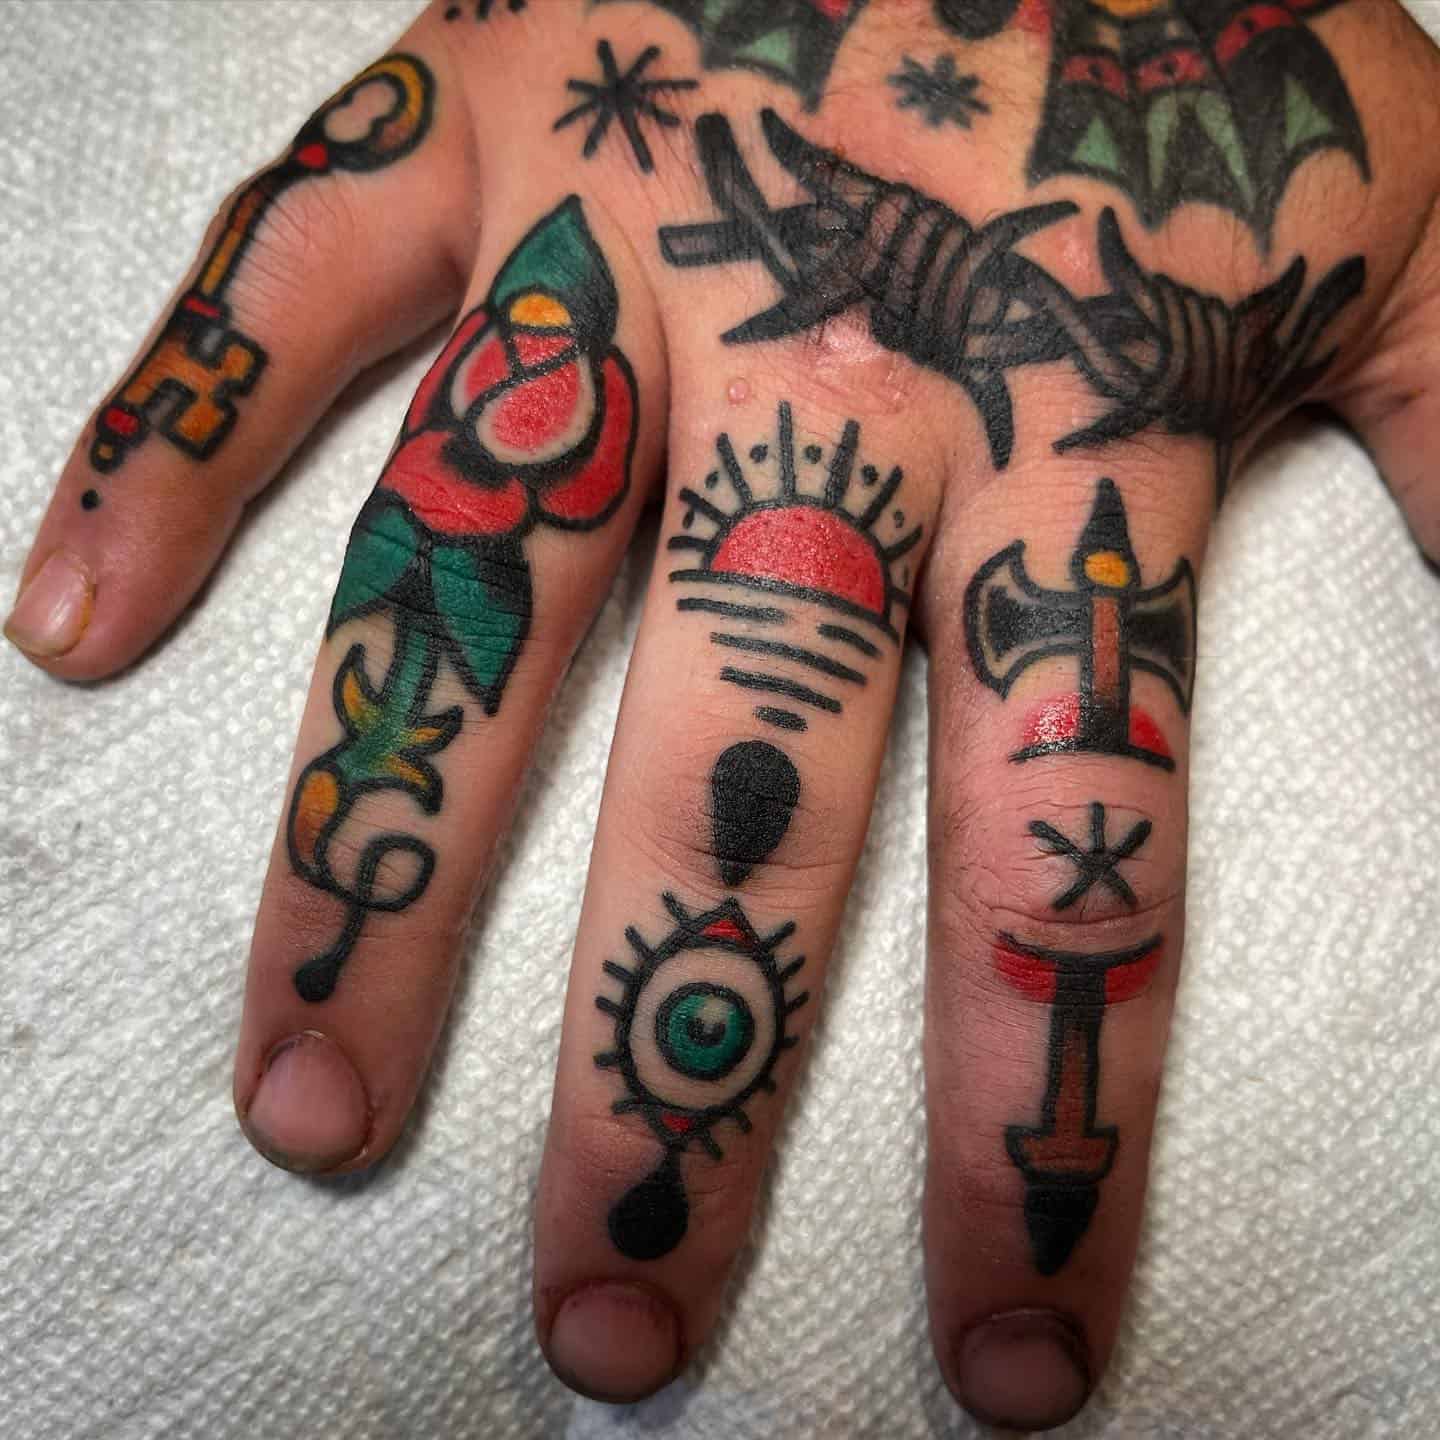 Syrens Tattoo Parlour  Some swollen sausage fingers from todays  traditional pieces fingertattoos traditionaltattoos cooltattoos  awesometattoos ouchthathurt oldschooltattoo jobstopper sorrymum  colourtattoos ink inkjunkeyz tat tattoo 